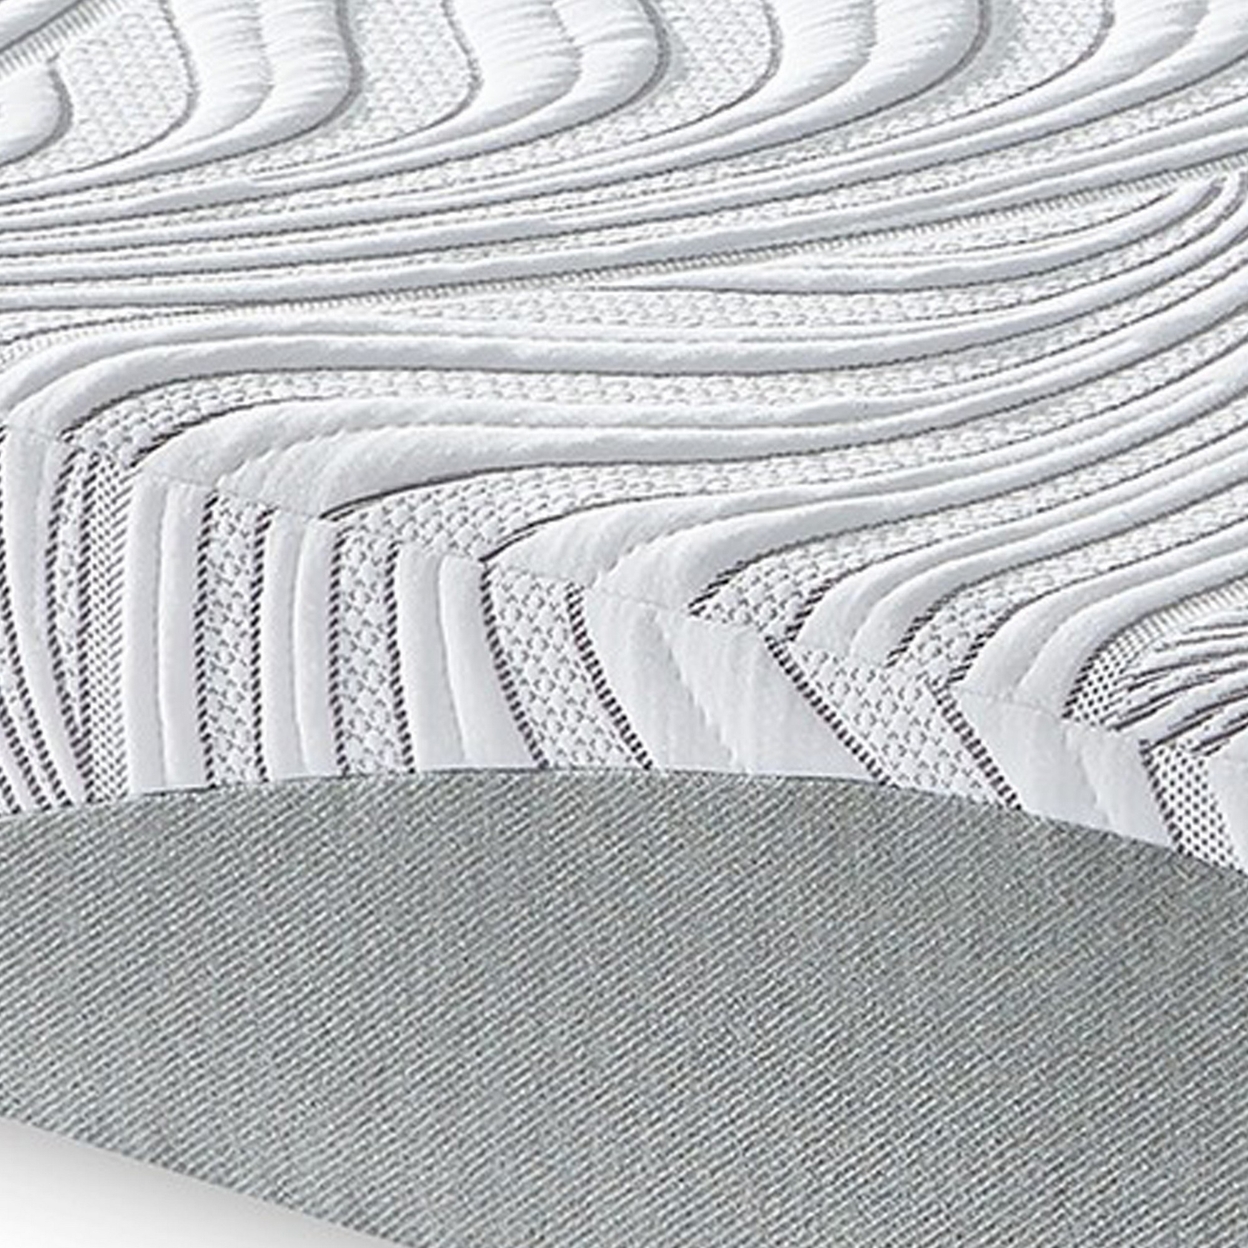 10 Inch Memory Foam Queen Mattress, White And Gray, Stretch Knit Cover